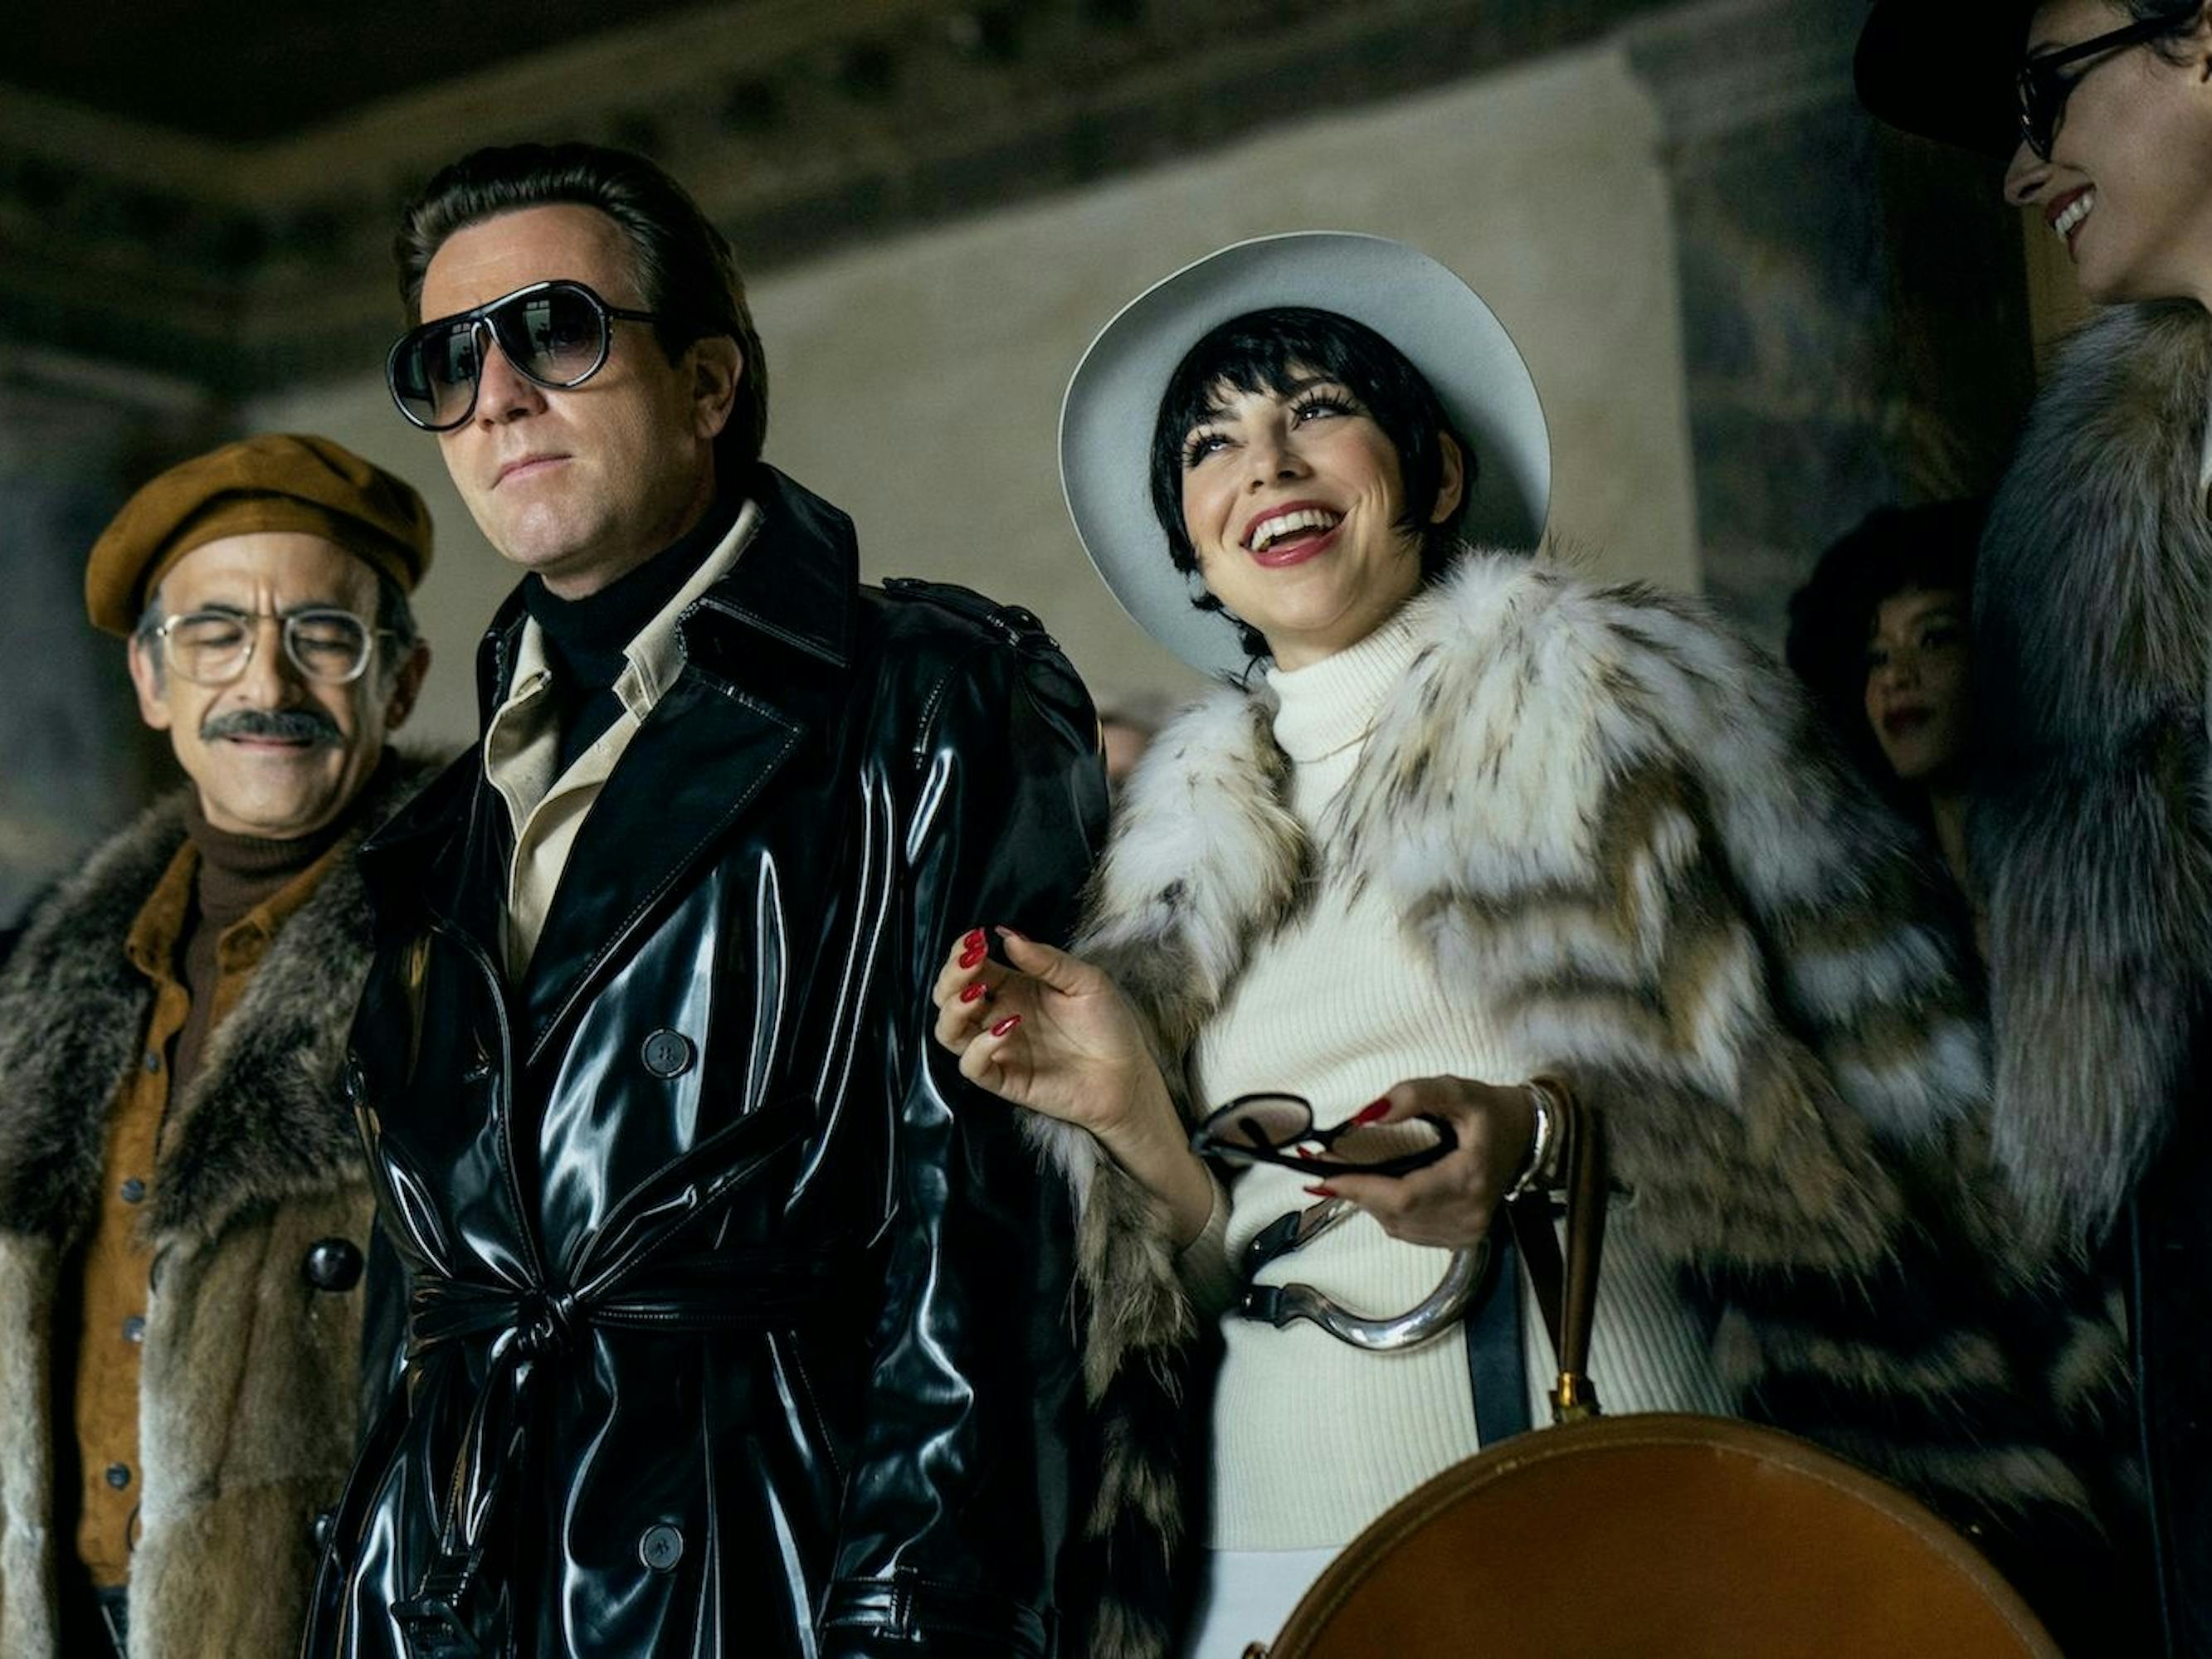 Joe Eula (David Pittu), Halston (Ewan McGregor), and Liza Minnelli (Krysta Rodriguez) stand in a row. Eula wears a fur coat, beret, glasses, and a mustache. Halston wears his signature jacket, and dark sunglasses. Minnelli wears all white, including a hat and fur.